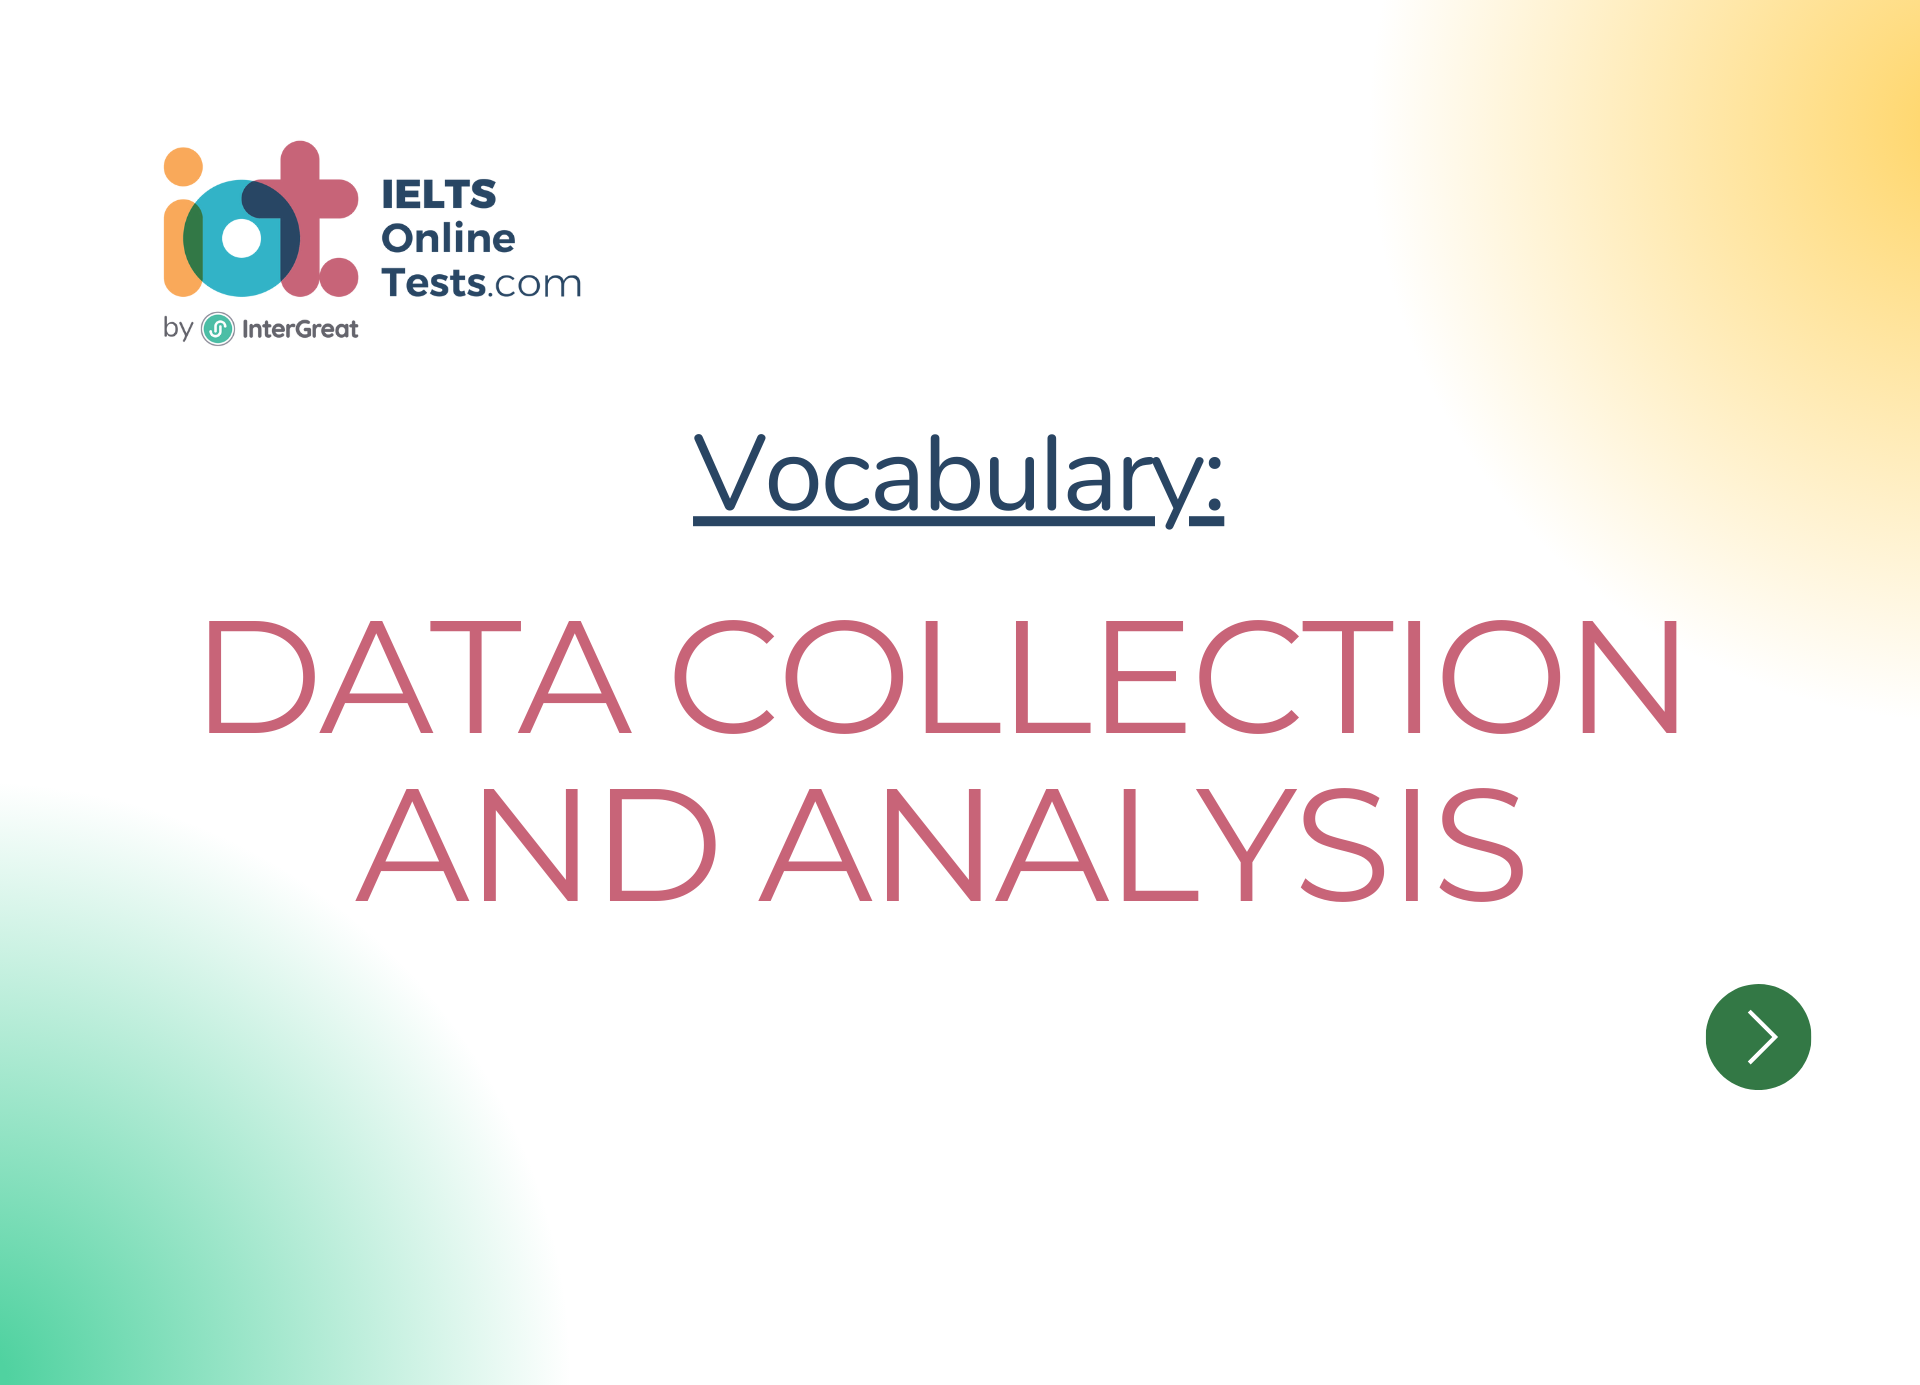 Data collection and analysis